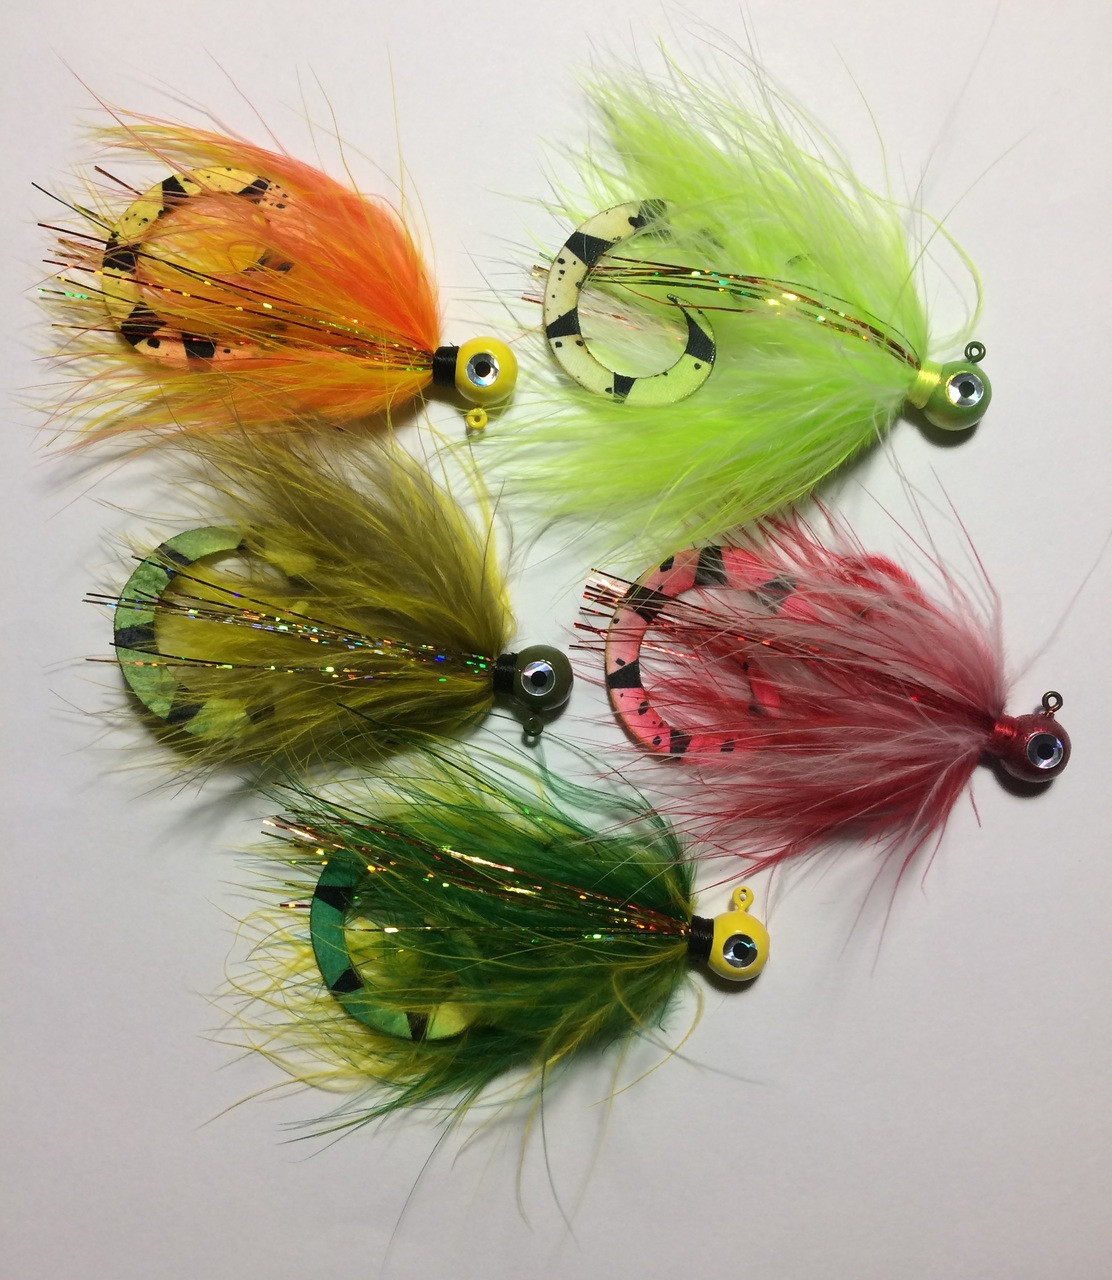 Palmered Marabou Jigs - Perch Patterns - Curly Tails